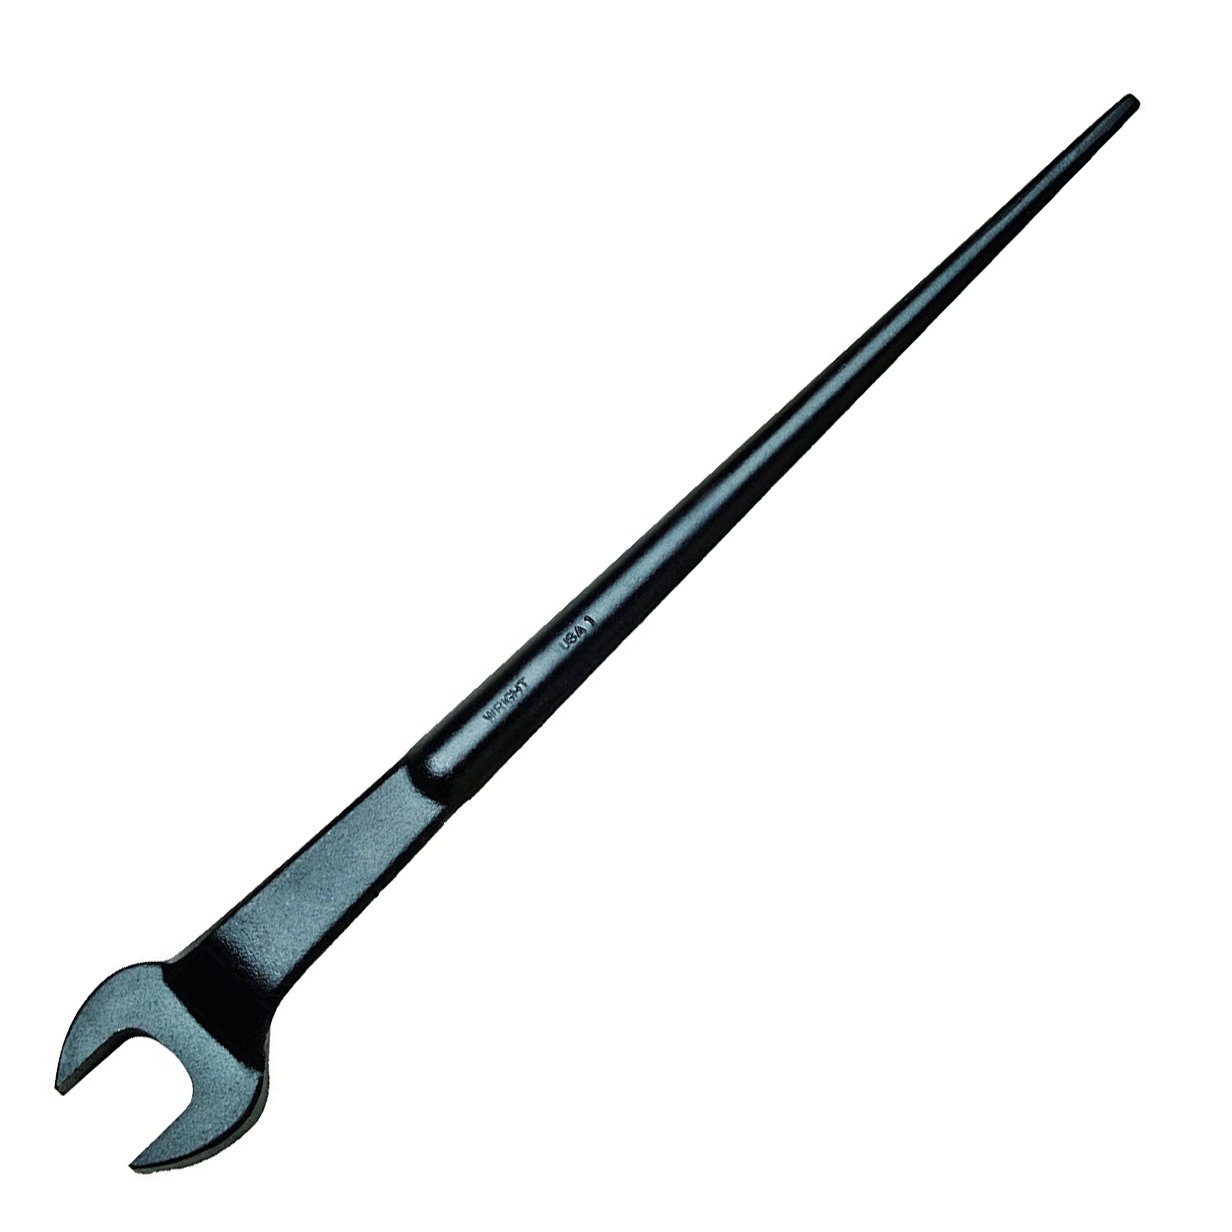 Wright 1-5/8" Structural Wrench Offset Head Black #1752 (1752WR)